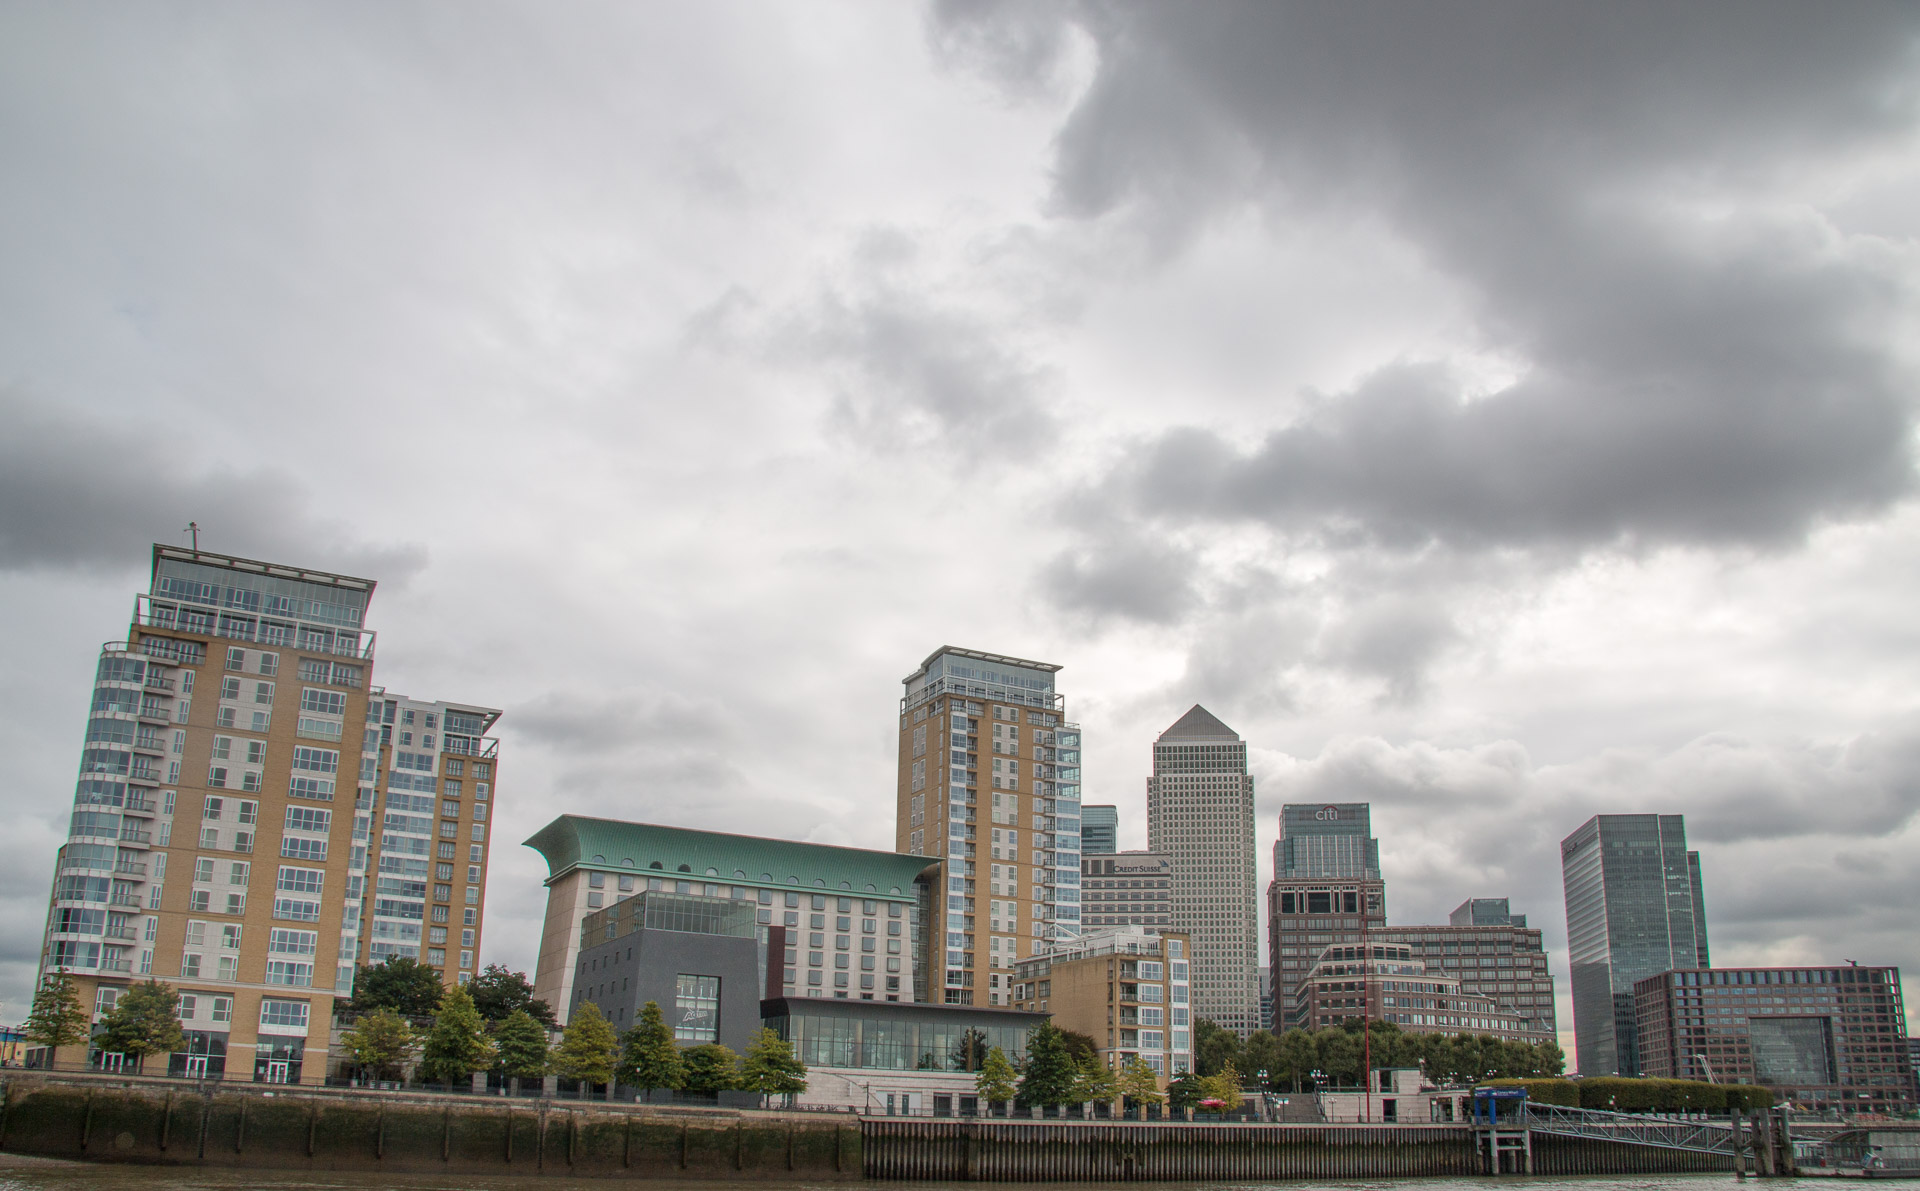 Docklands while cruising down the Thames in London